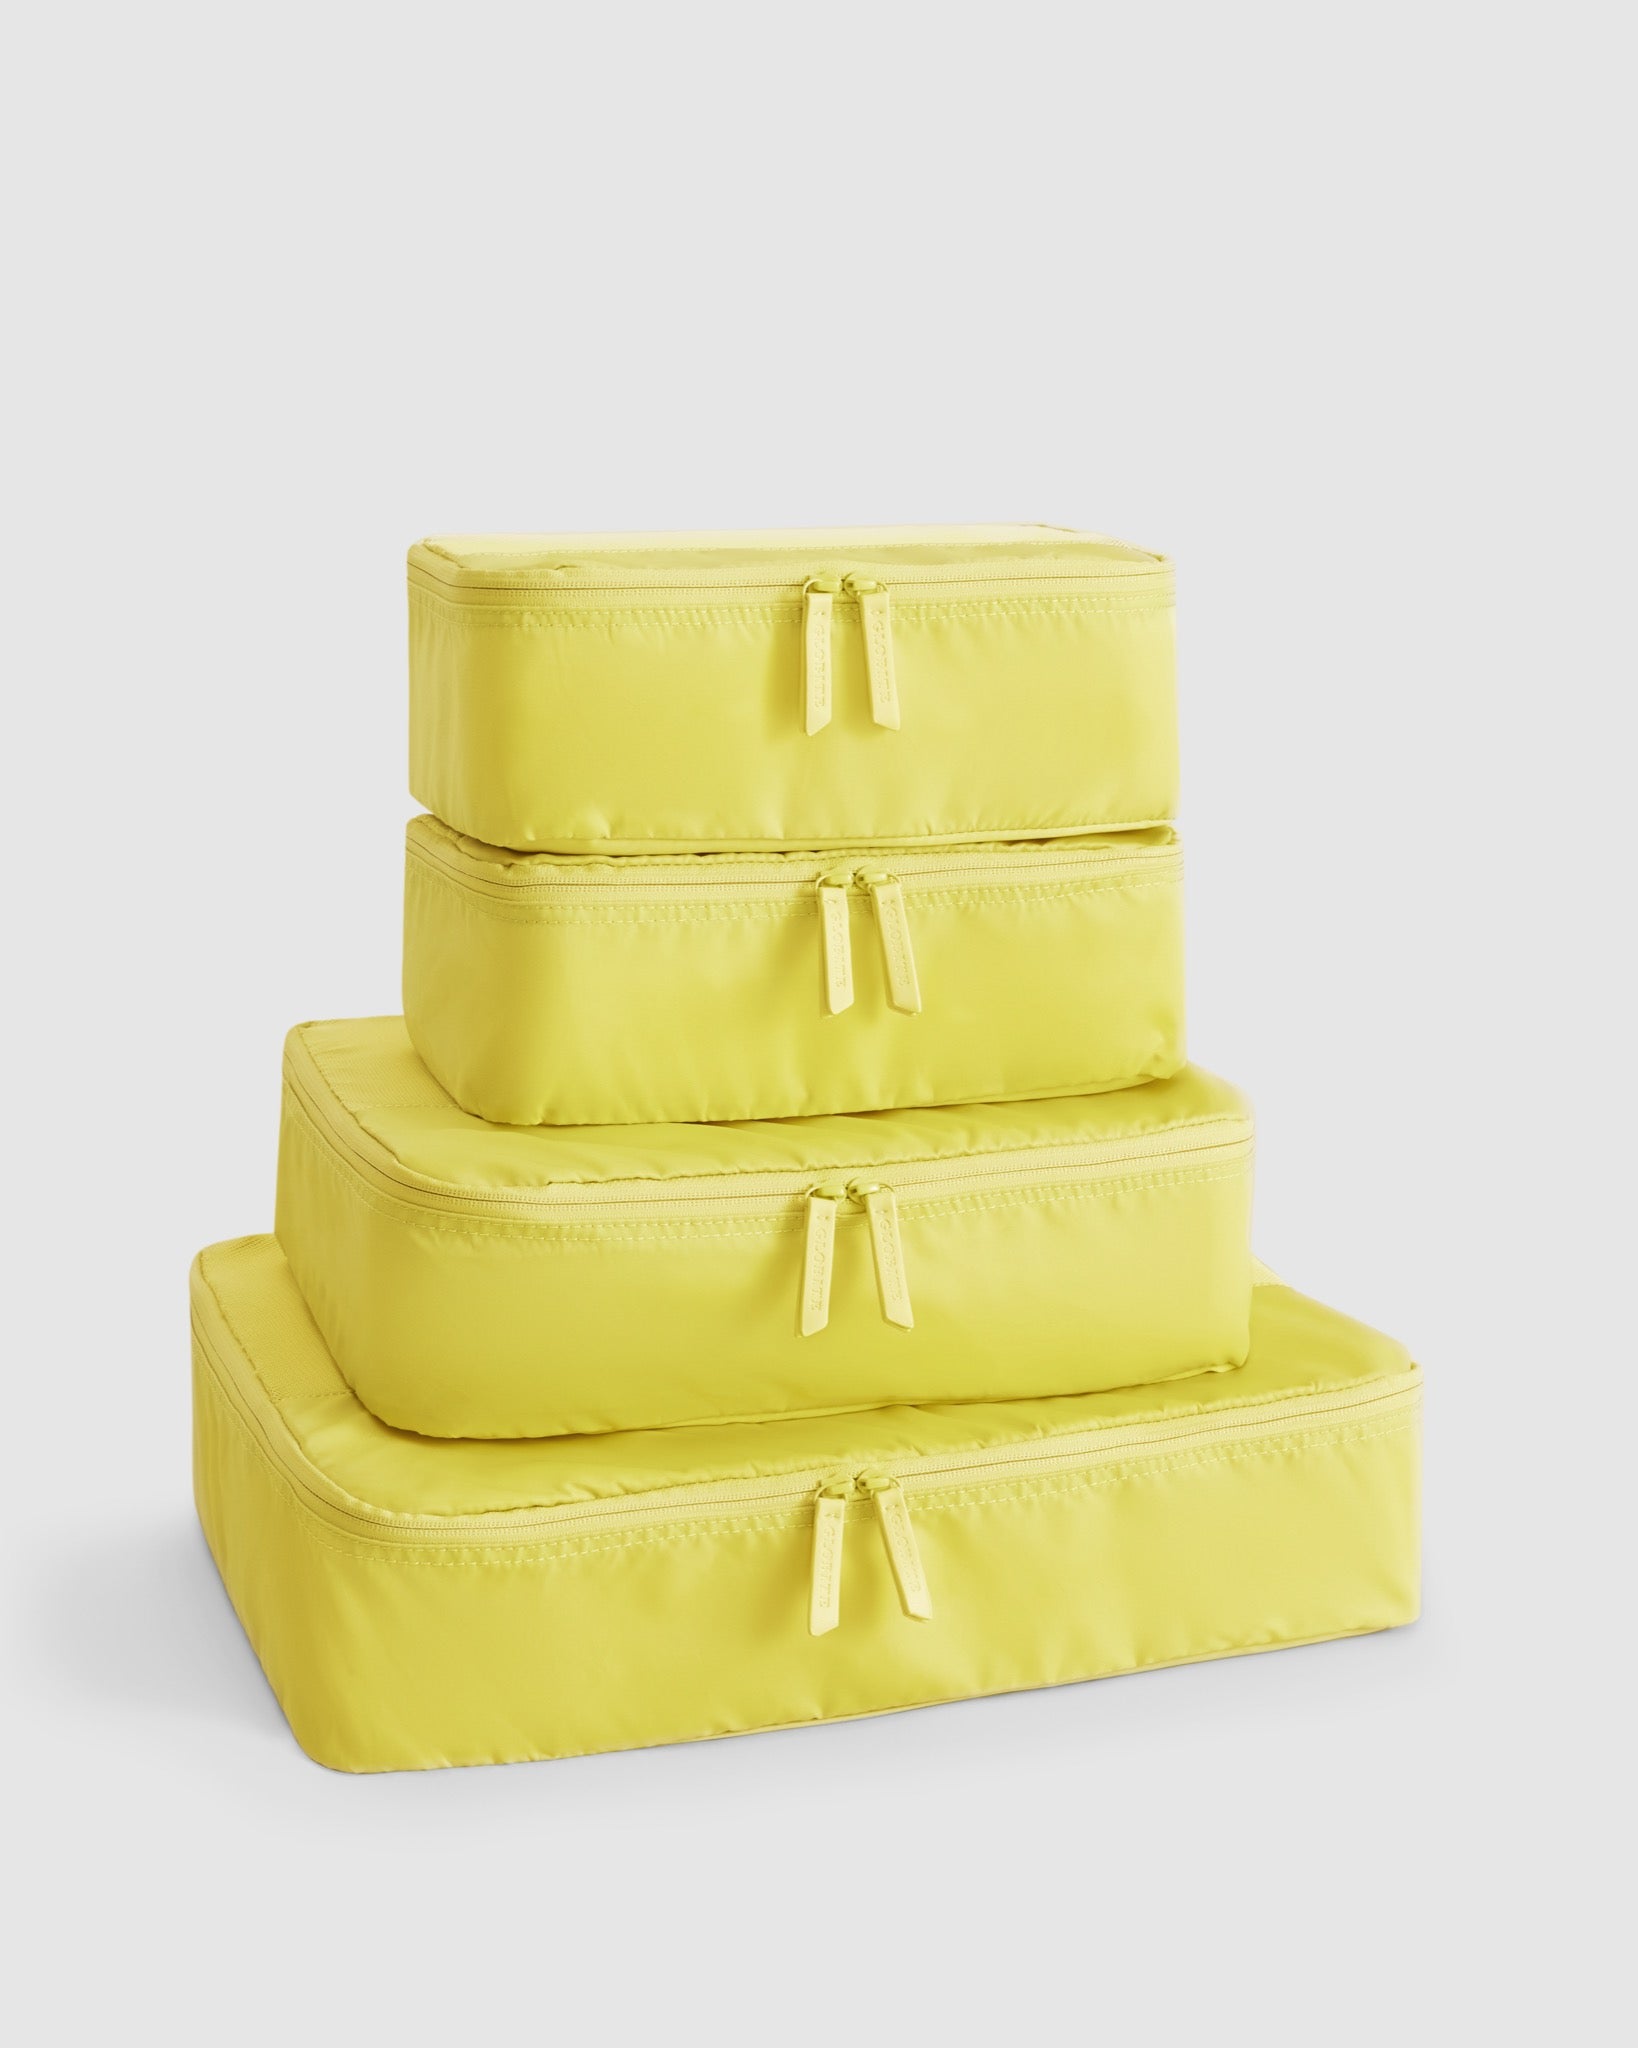 Endive 4 Piece Packing Cube